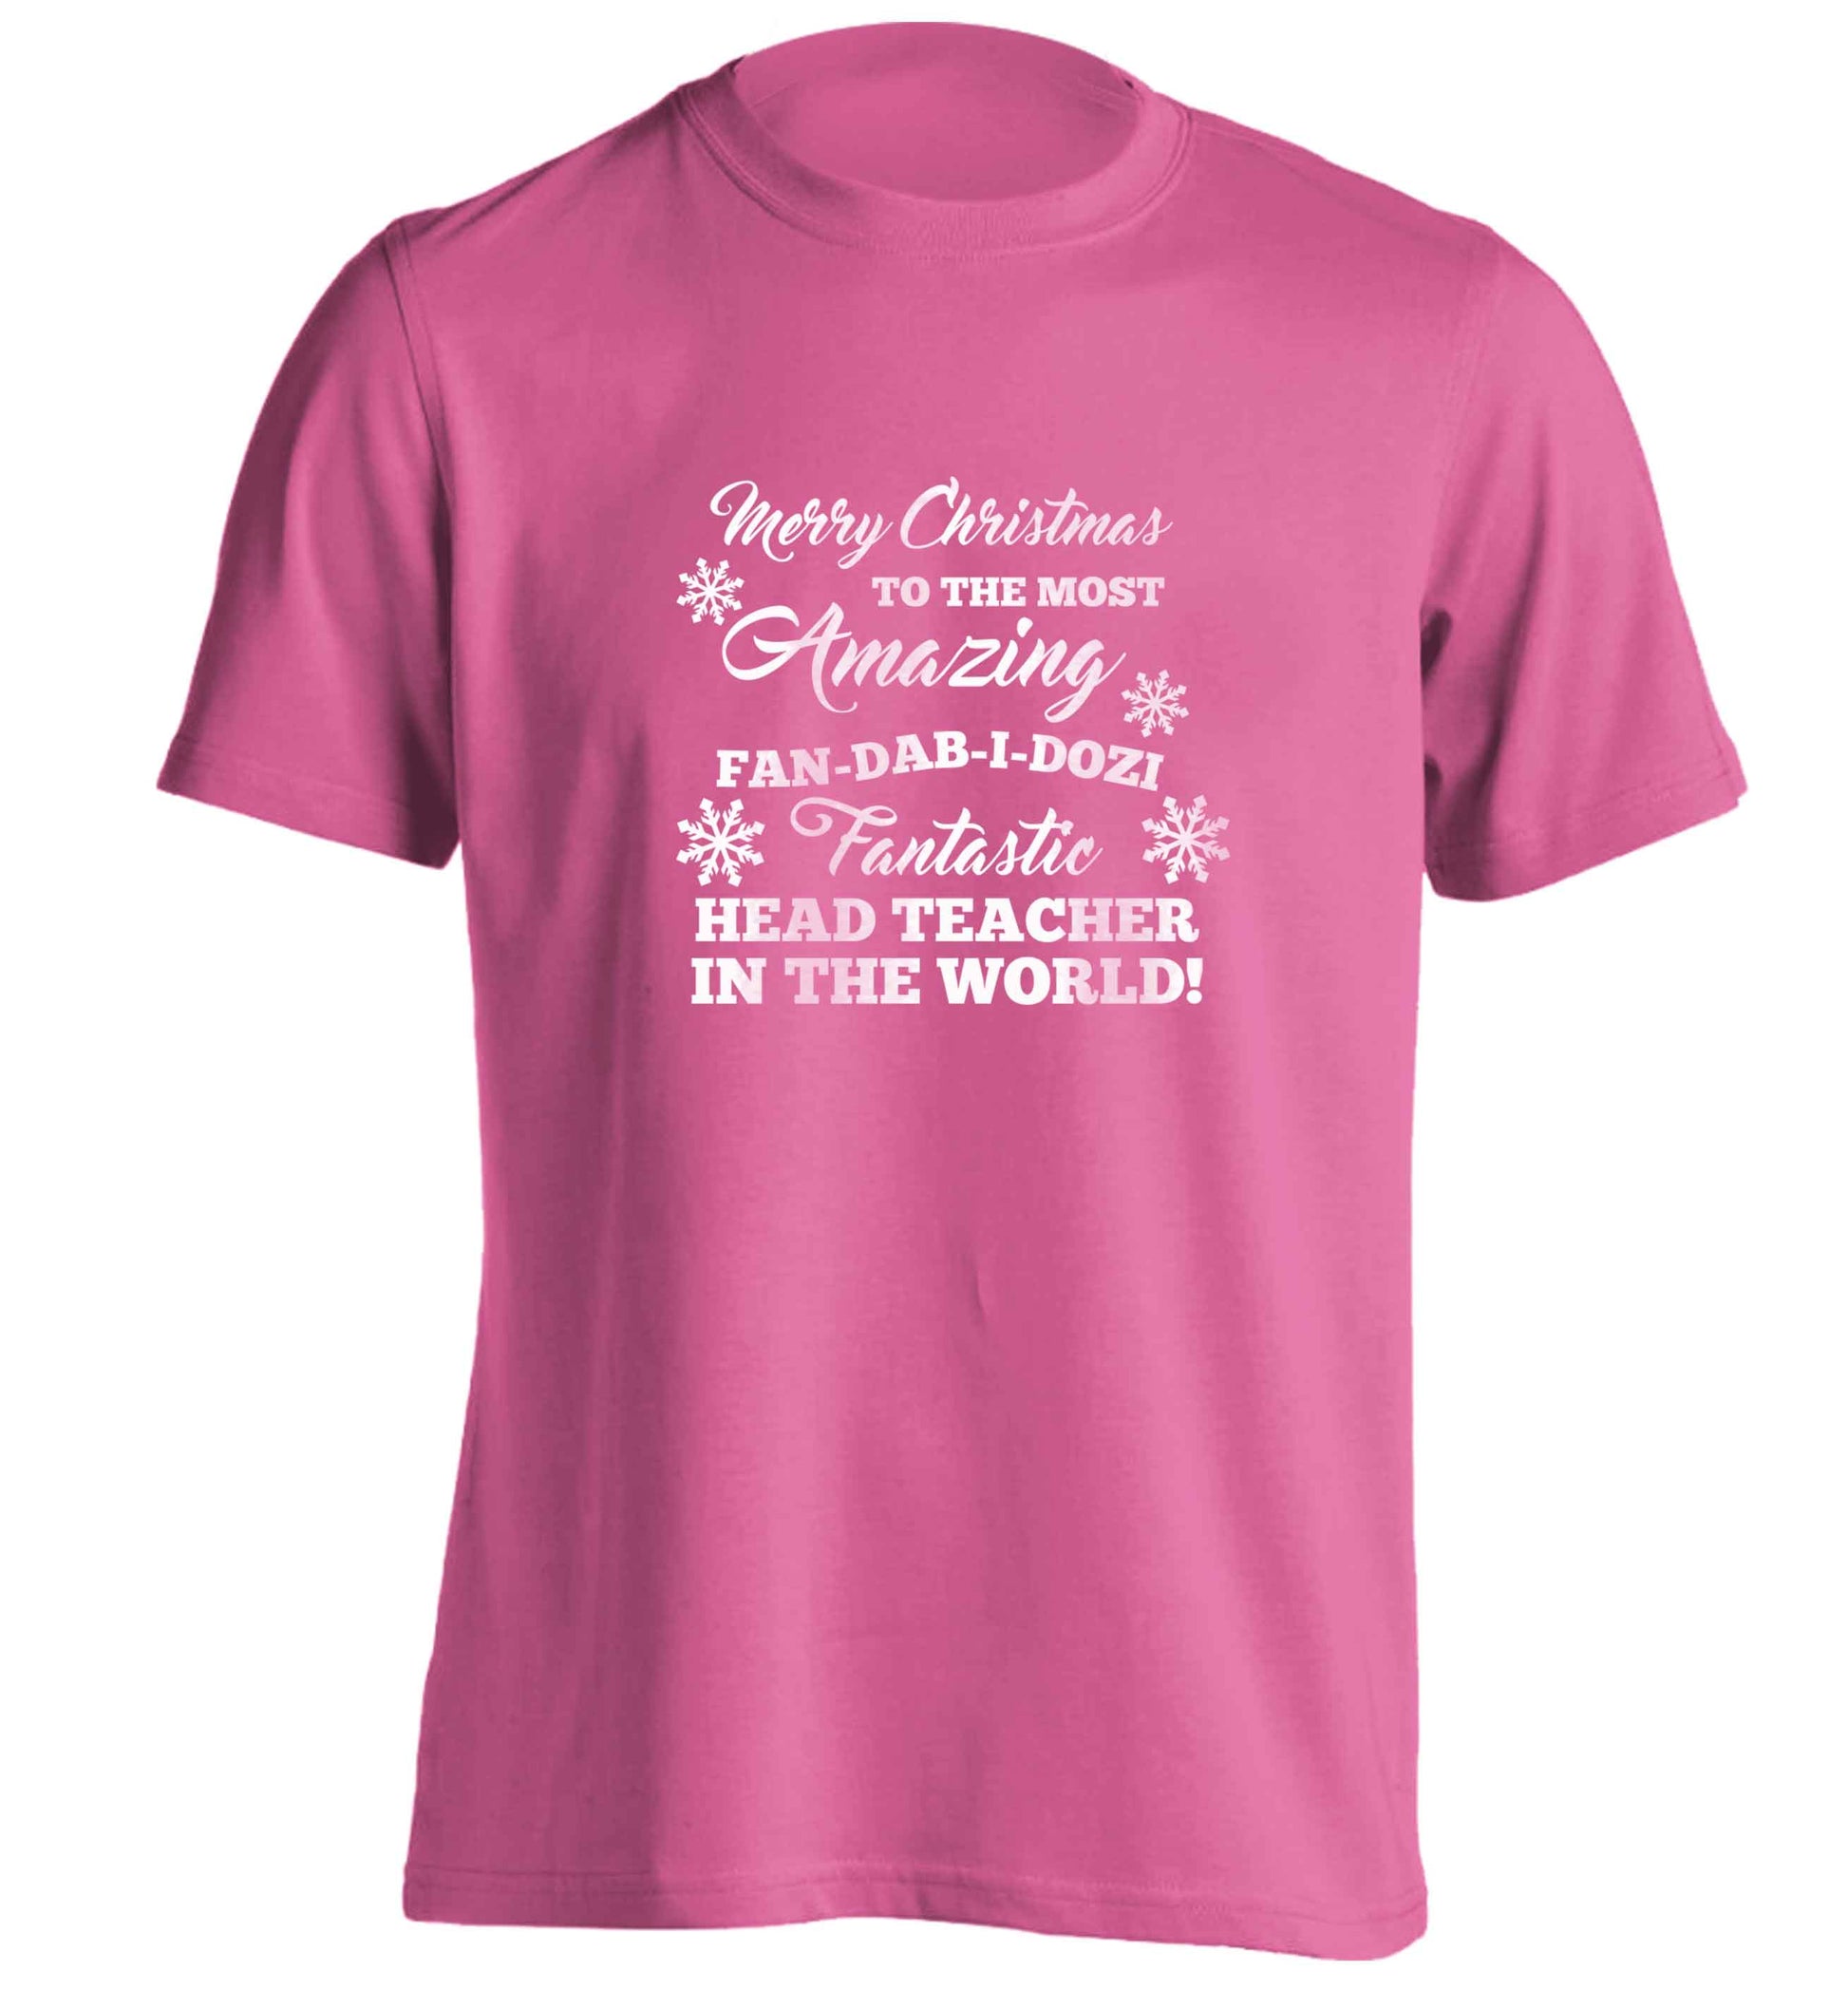 Merry Christmas to the most amazing fan-dab-i-dozi fantasic head teacher in the world adults unisex pink Tshirt 2XL